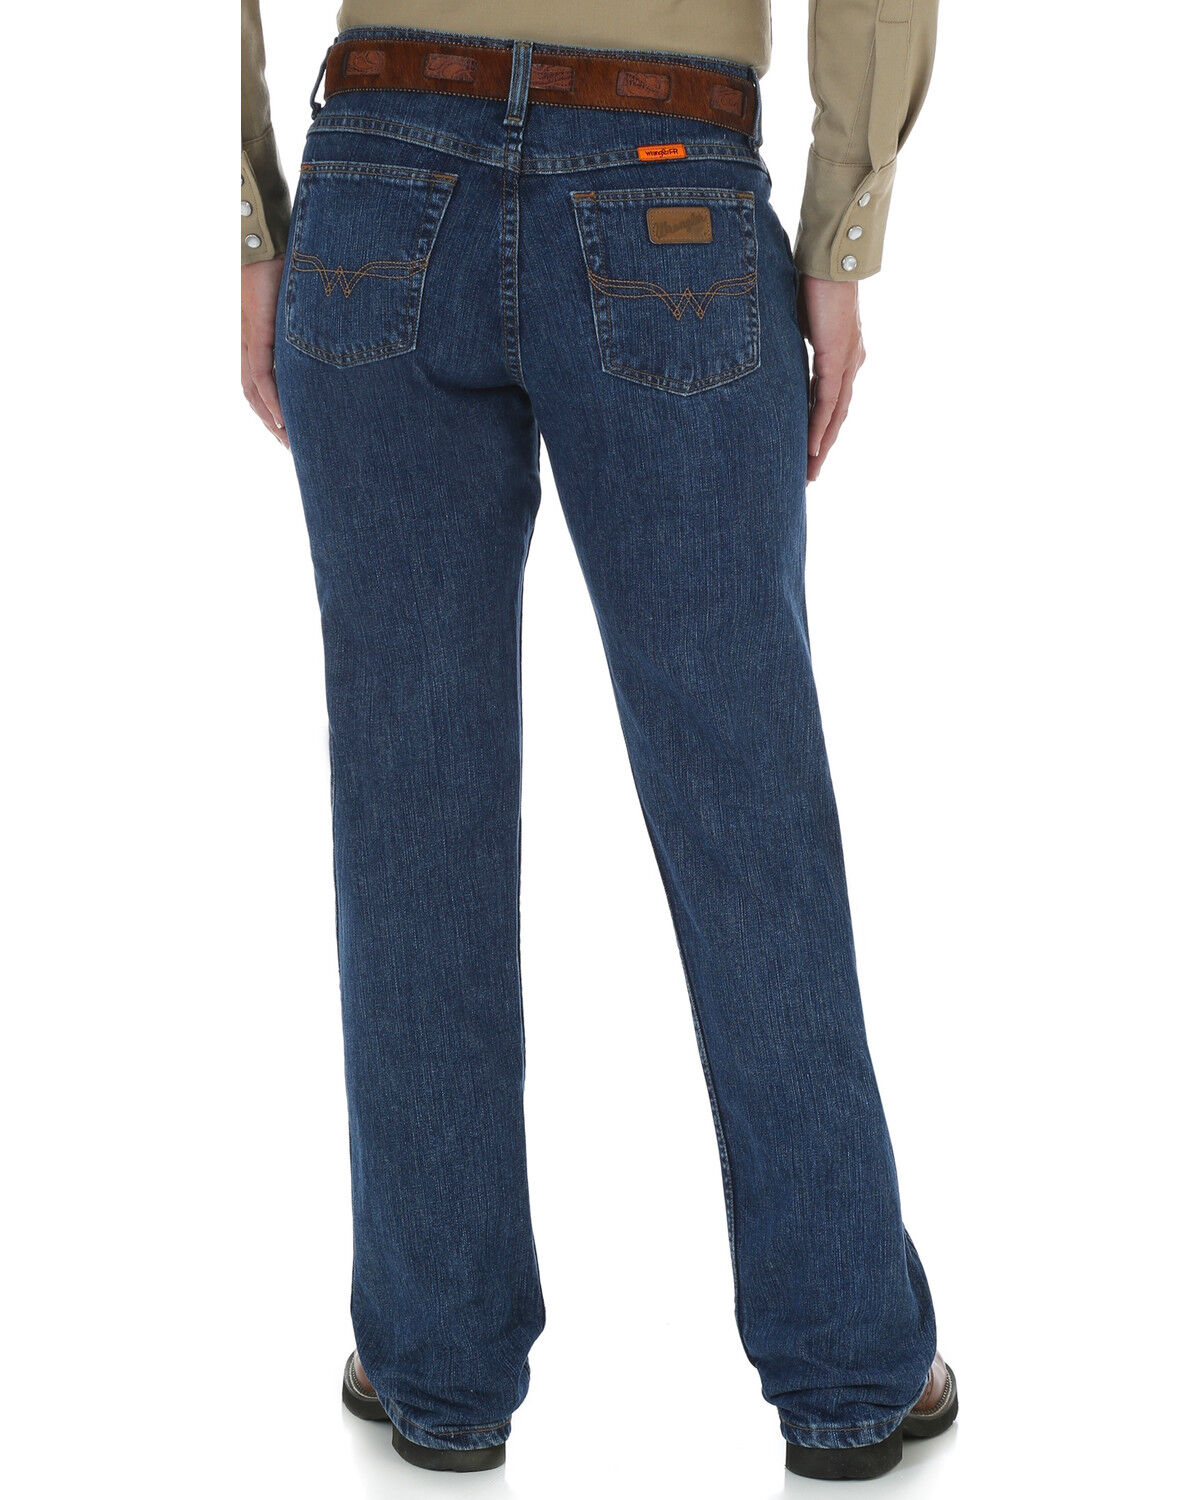 FR Flame Resistant Work Jeans | Boot Barn